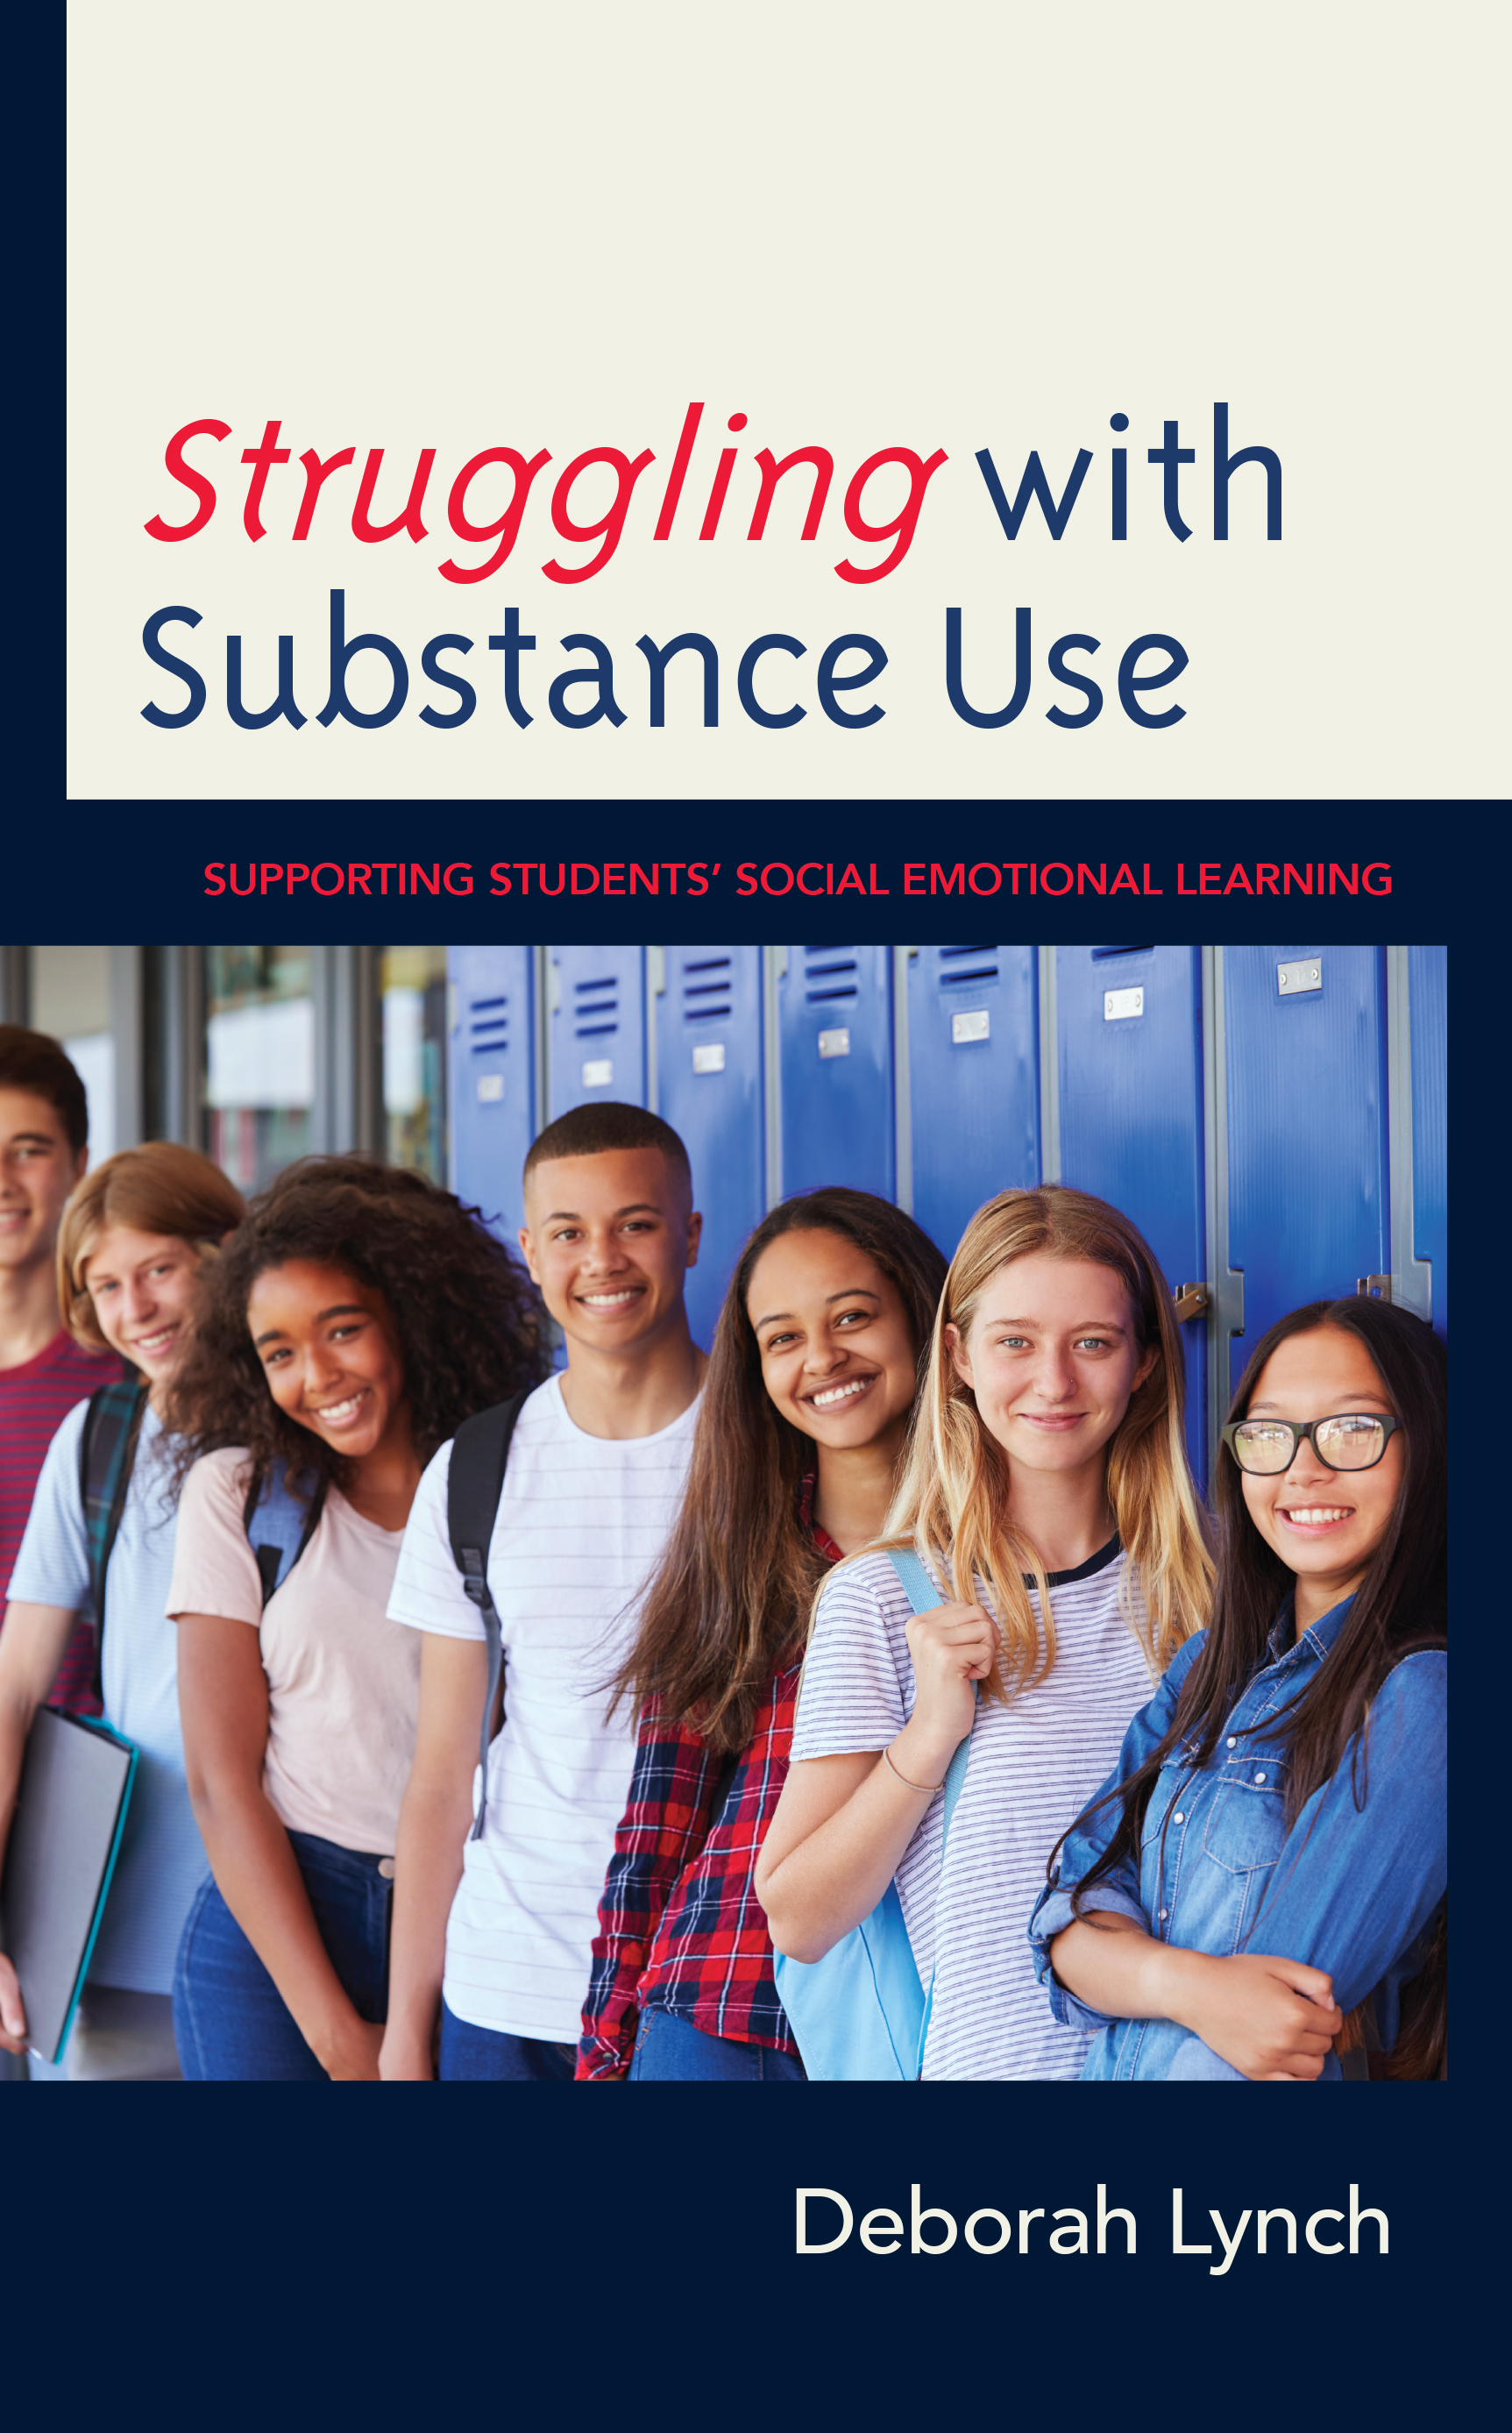 Struggling with Substance Use: Supporting Students’ Social Emotional Learning